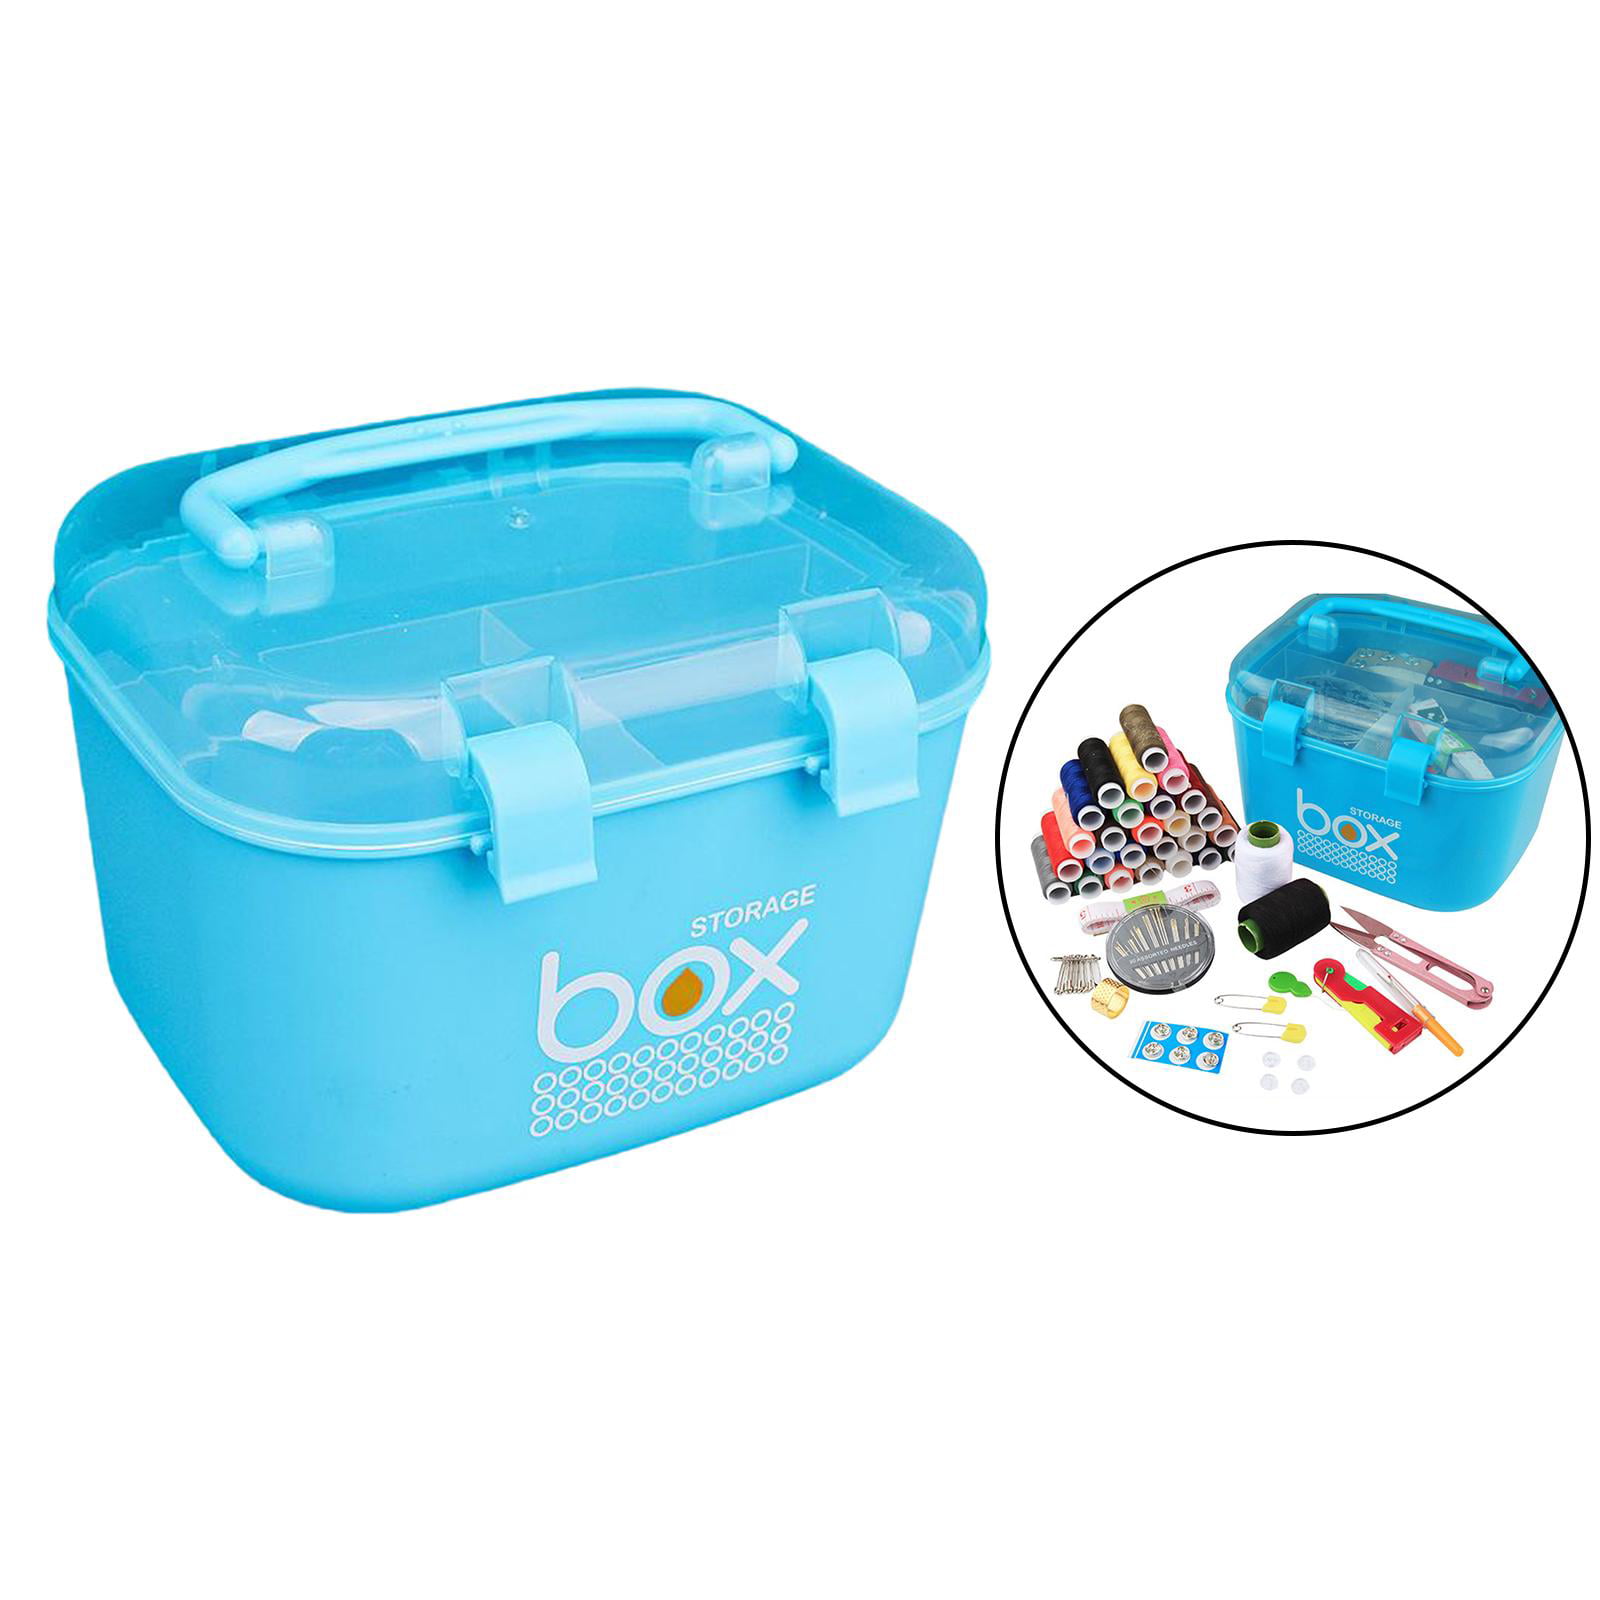 Multipurpose Storage Box with Handle ,Sewing Box Organizer ,Crafts Supplies  Case Handled for Cosmetic